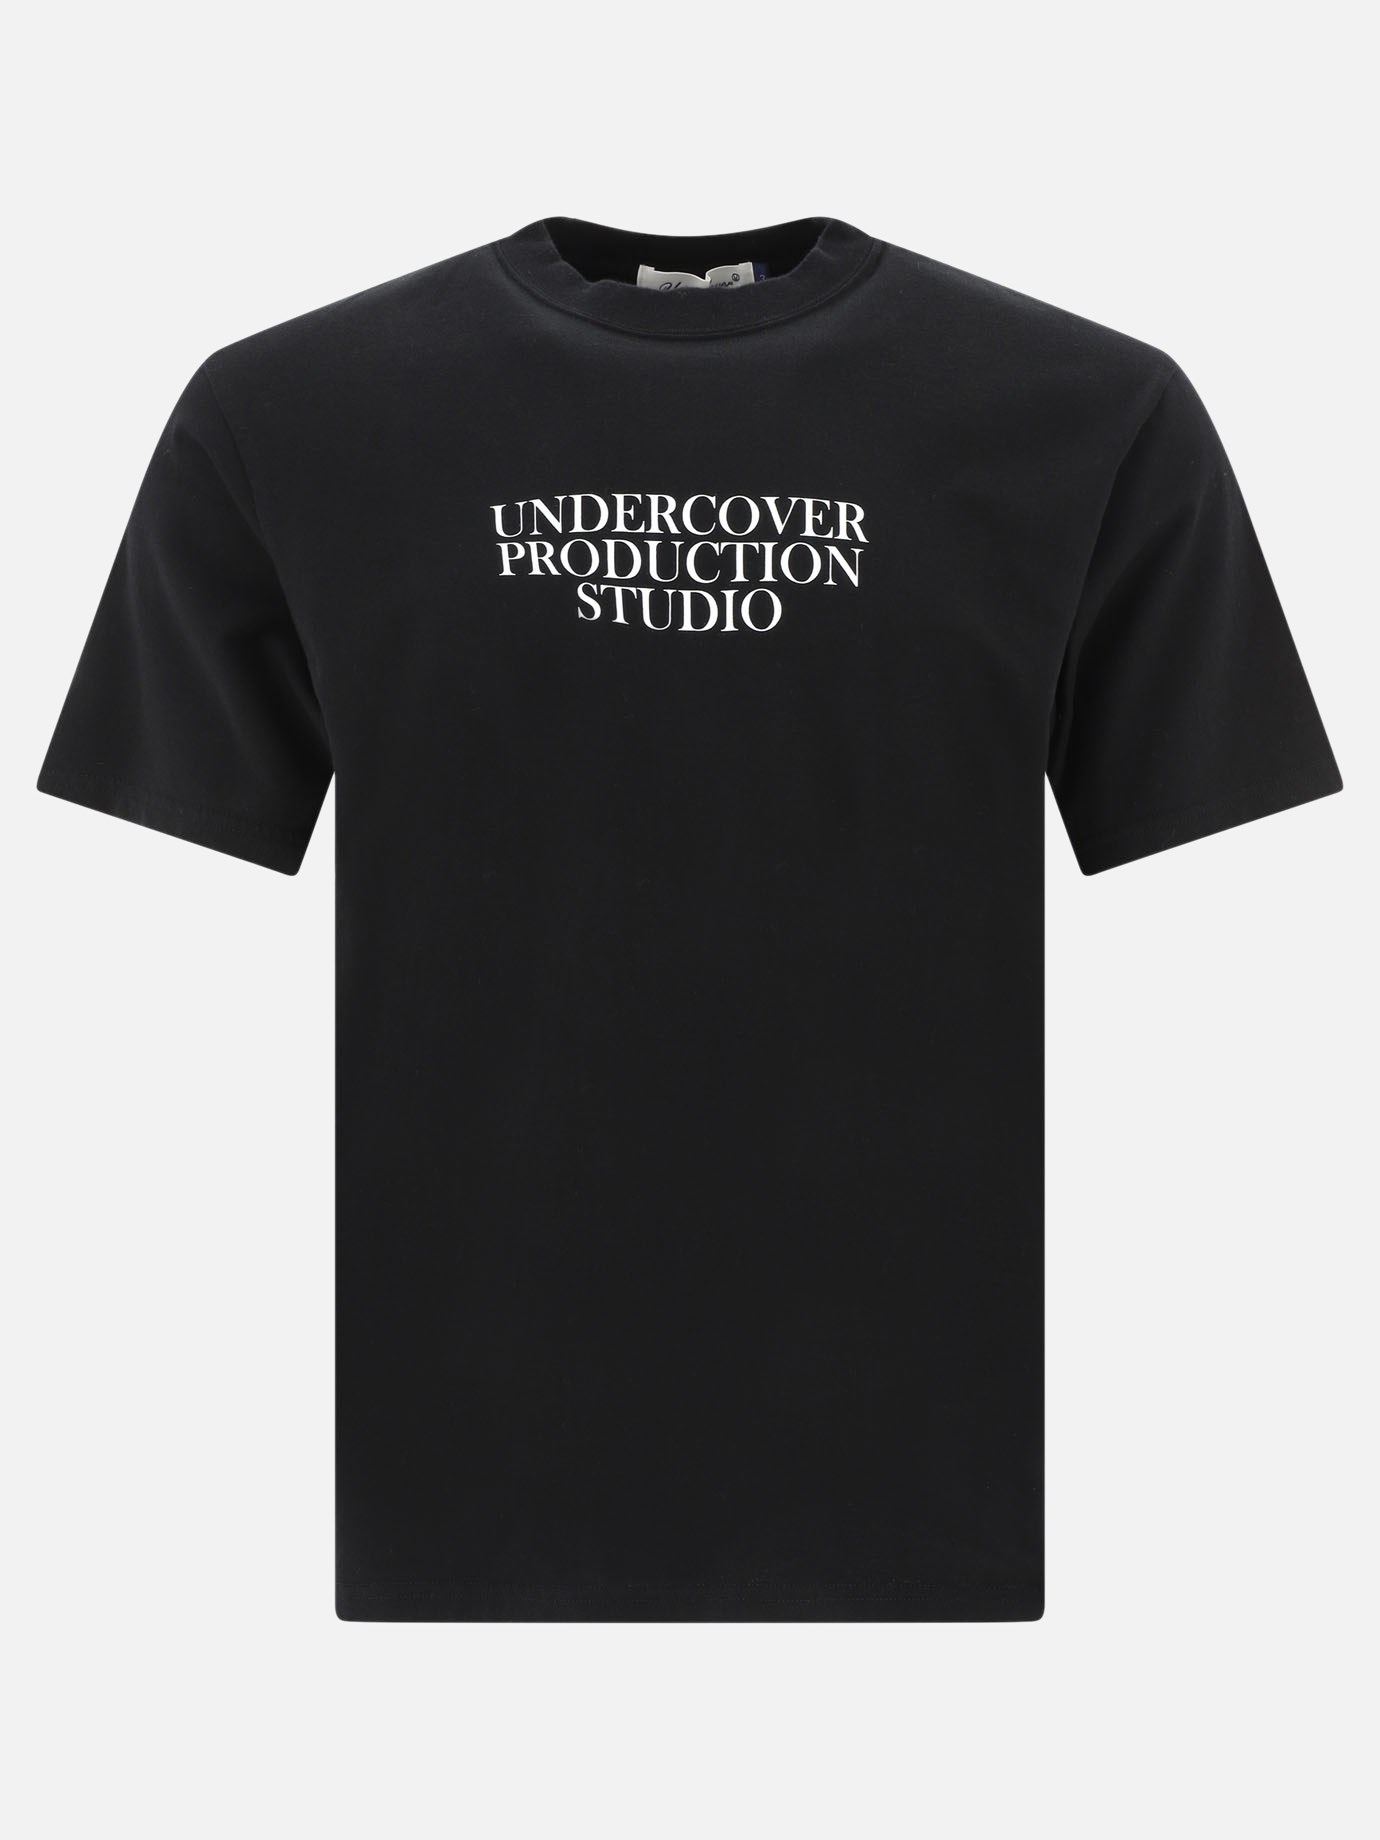 T-shirt  Production Studio by Undercover - 3